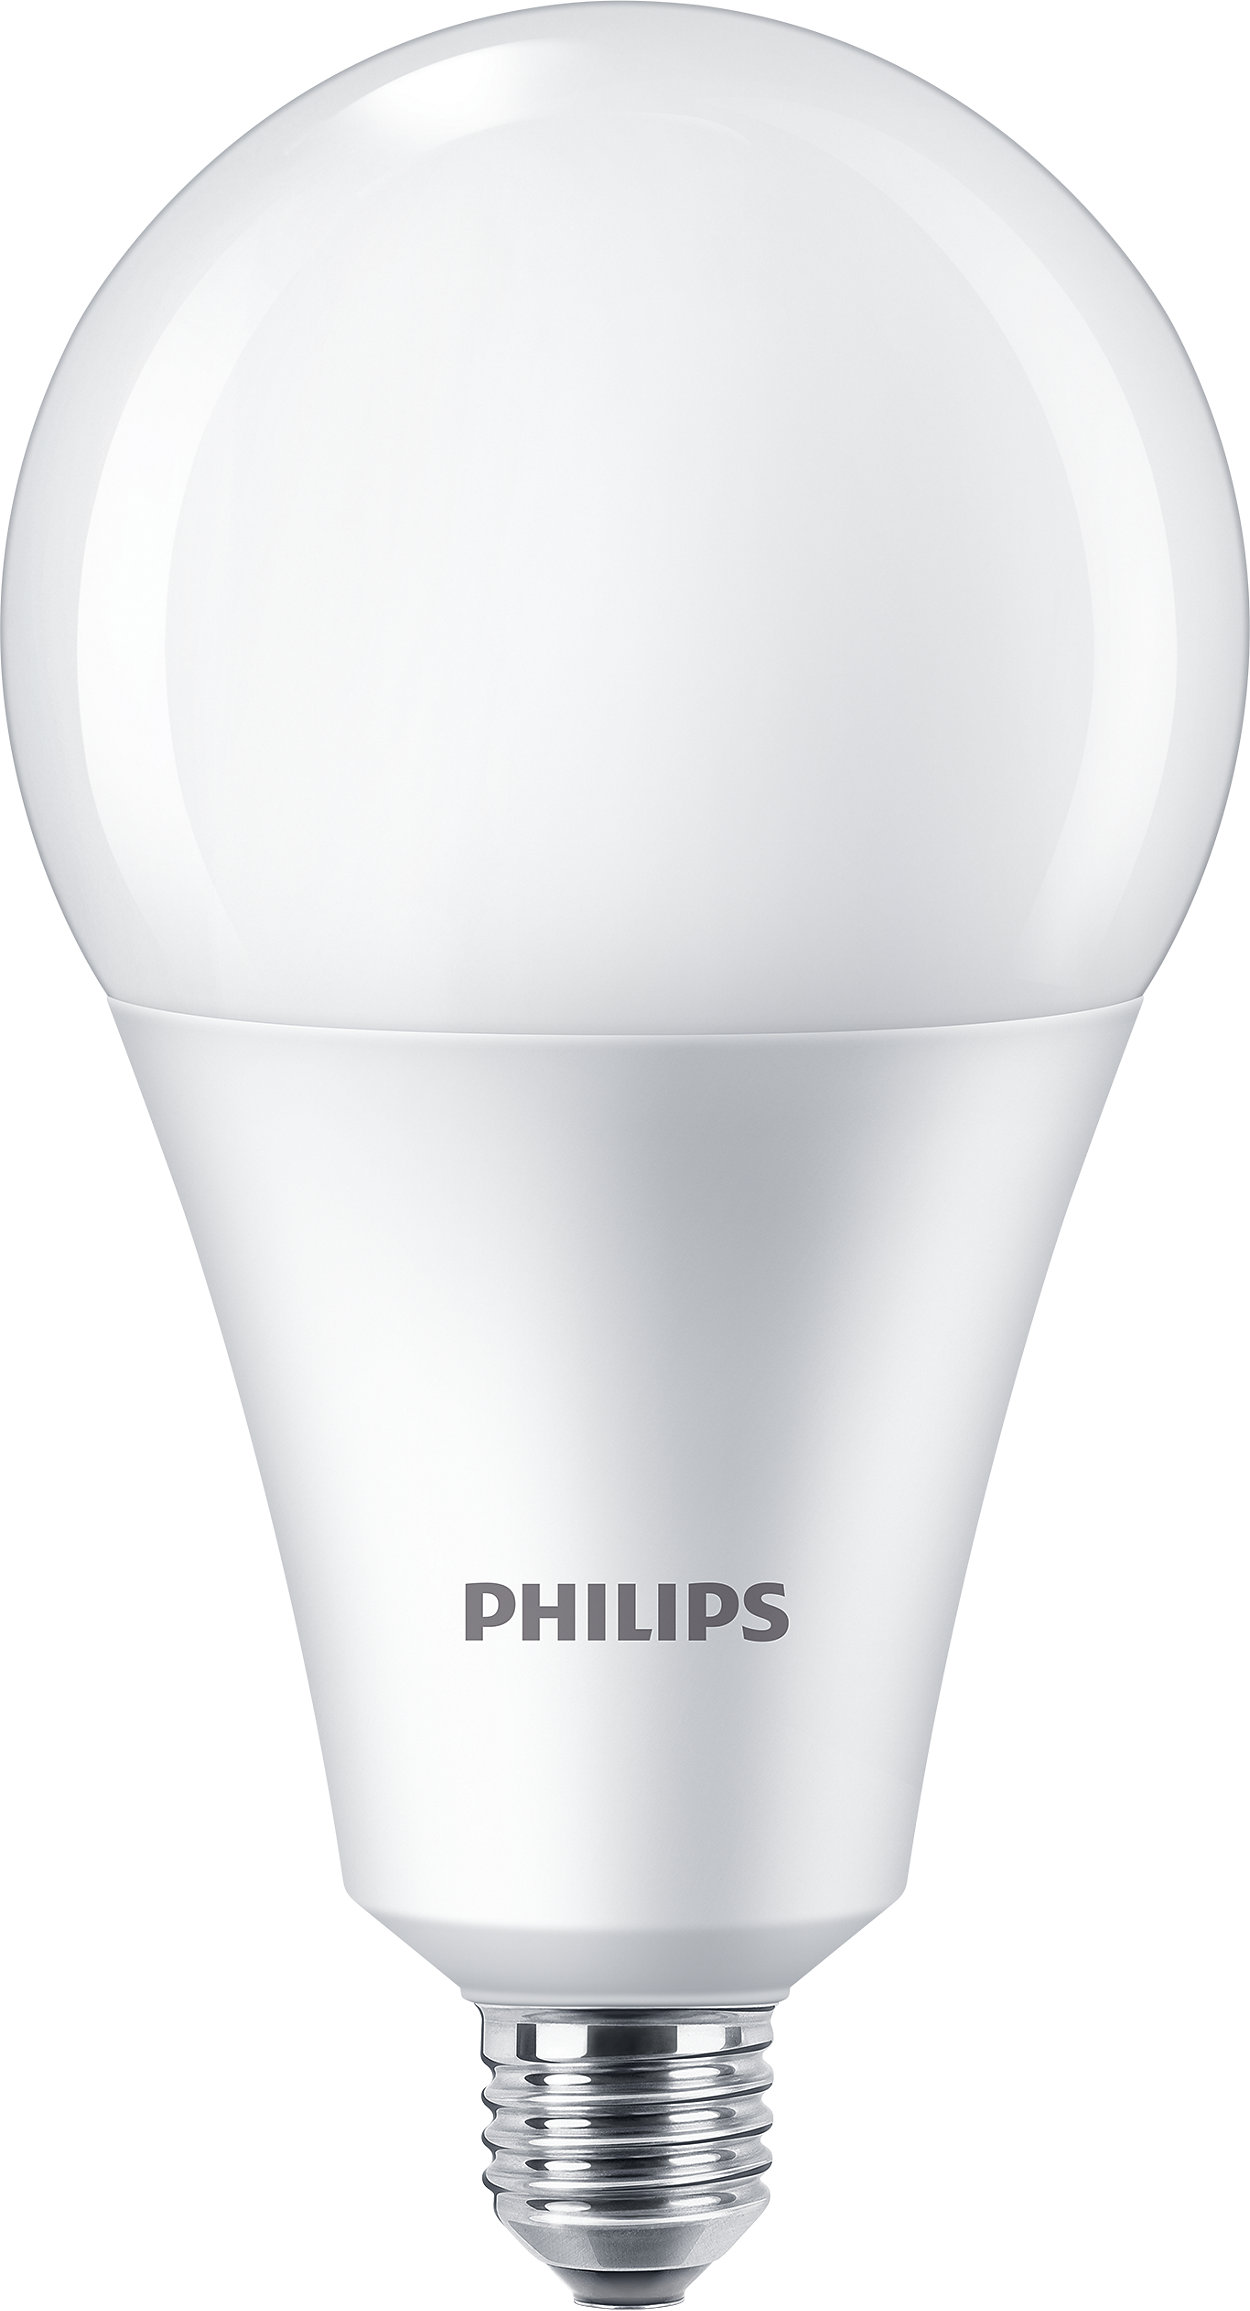 Attractive LED alternative to popular incandescents.